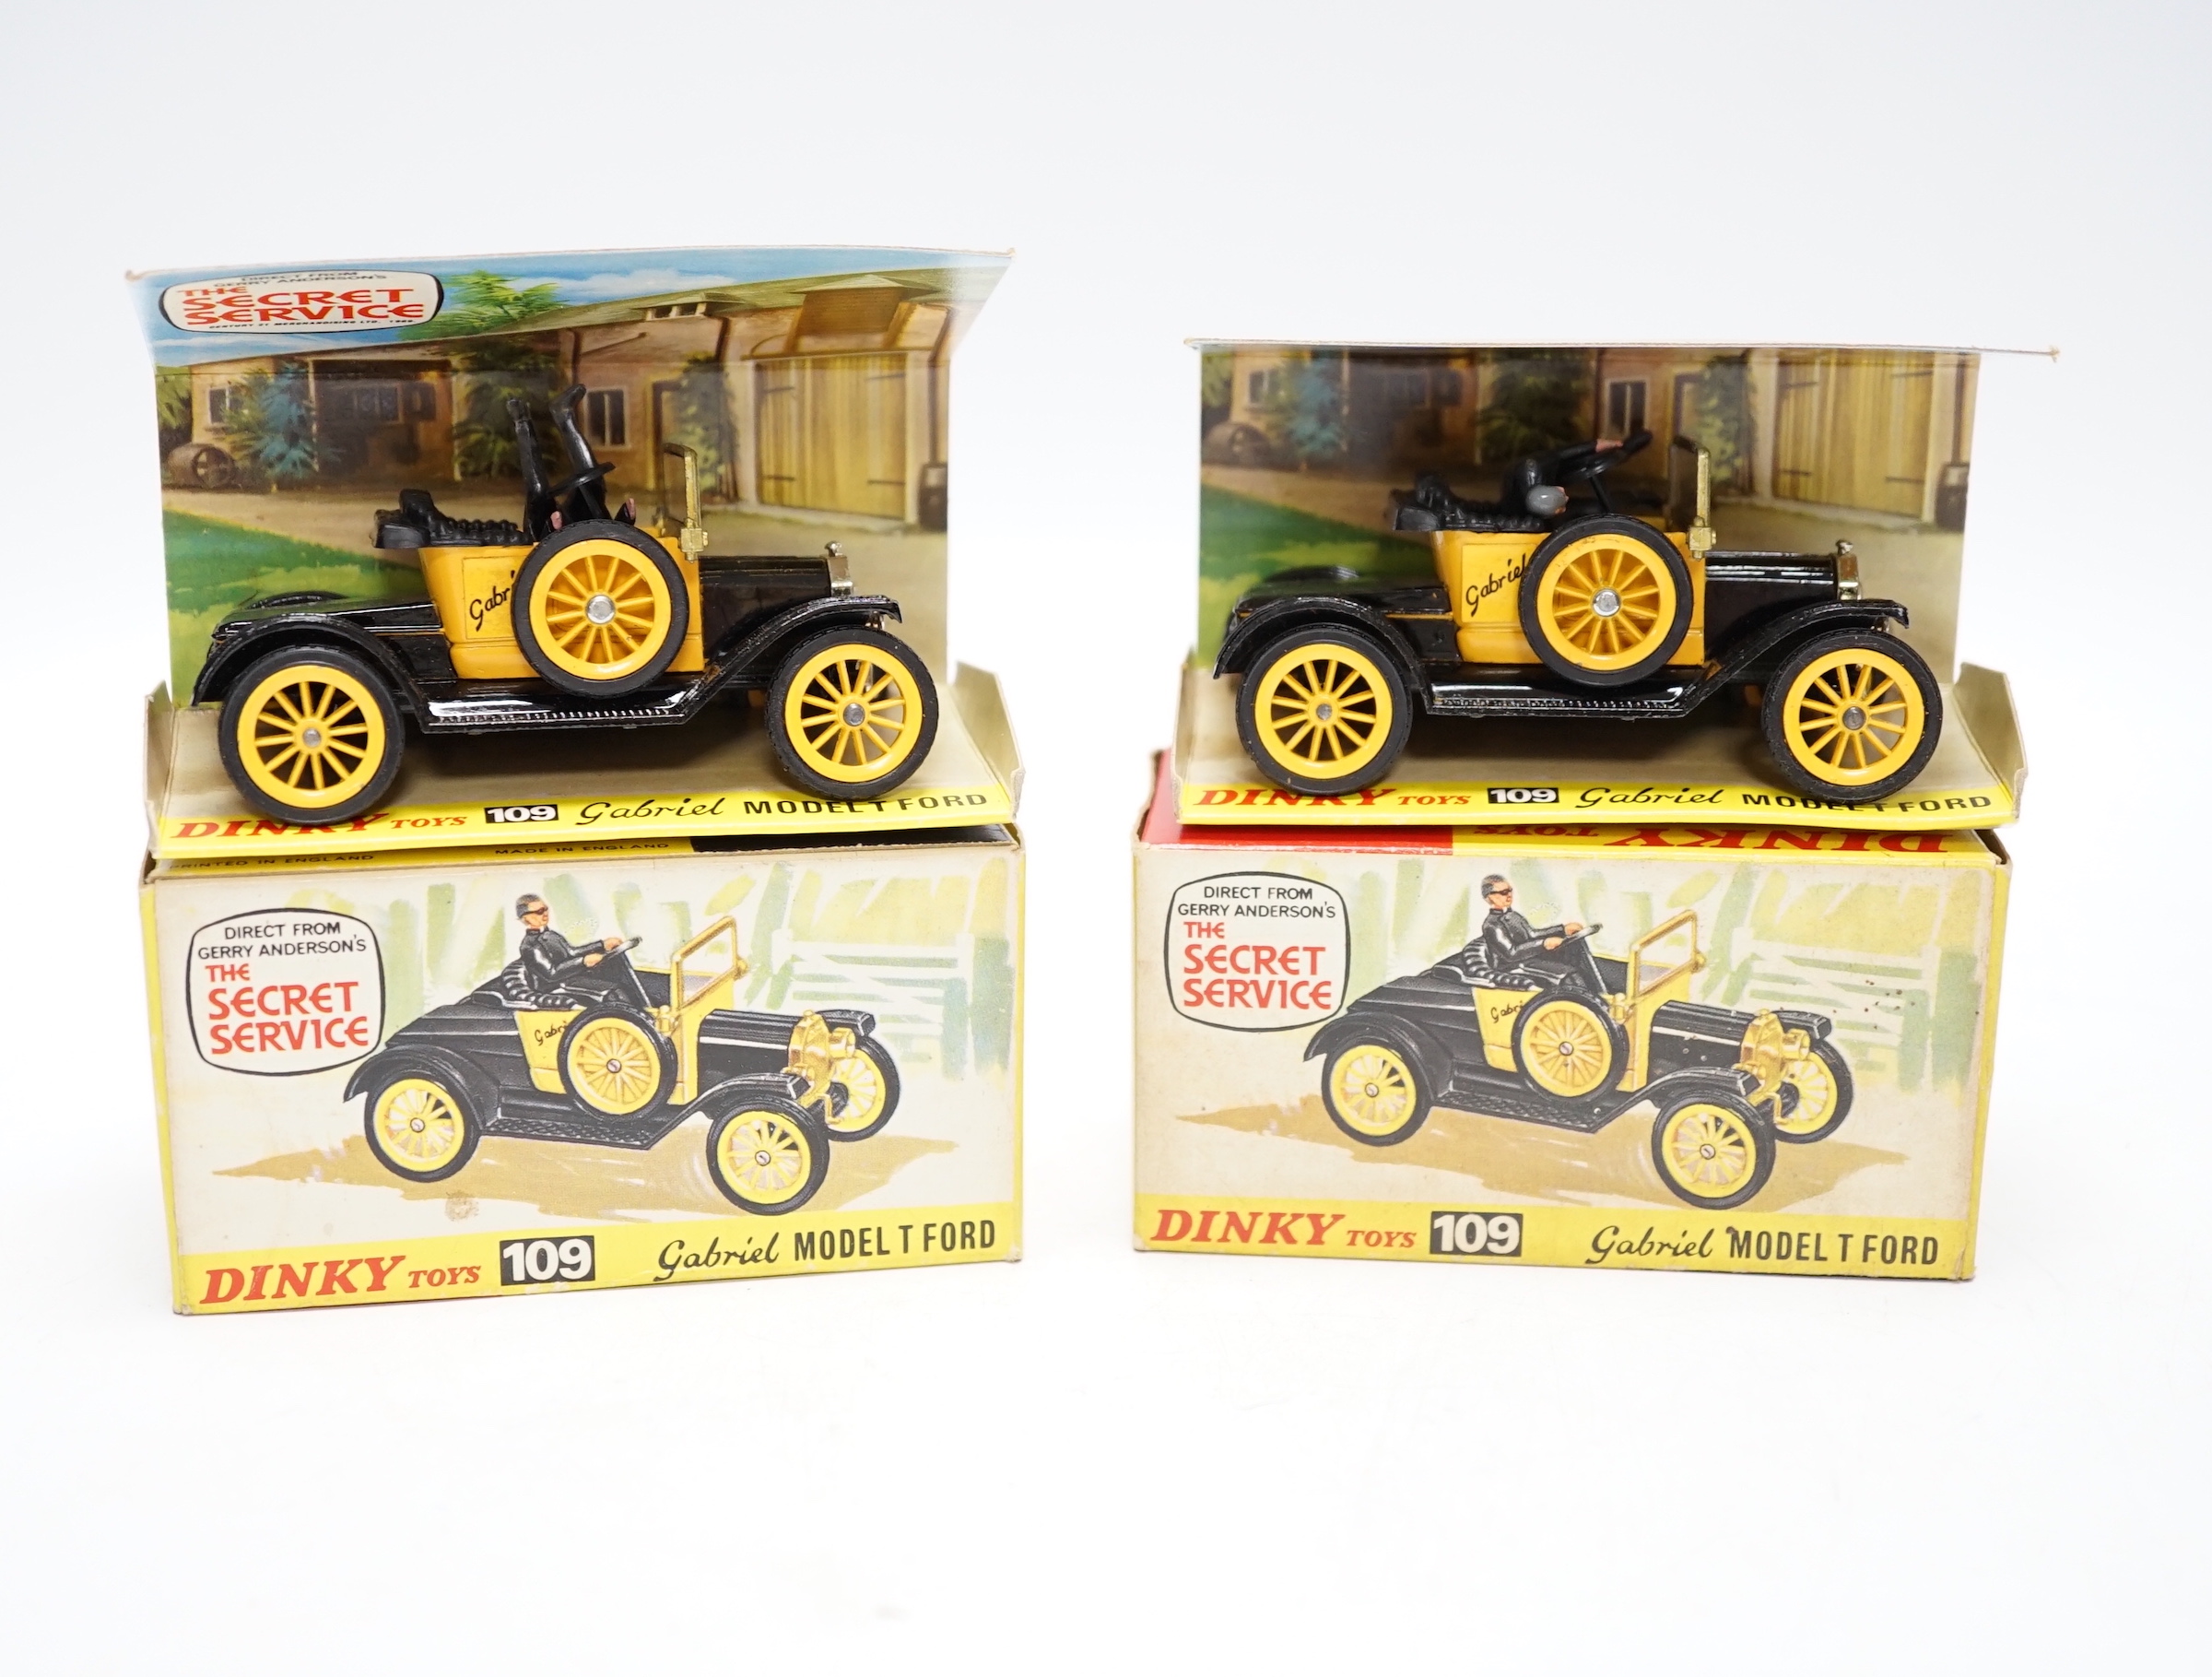 Two Dinky Toys (109) Gabriel Model T Ford, both boxed with inner display stands